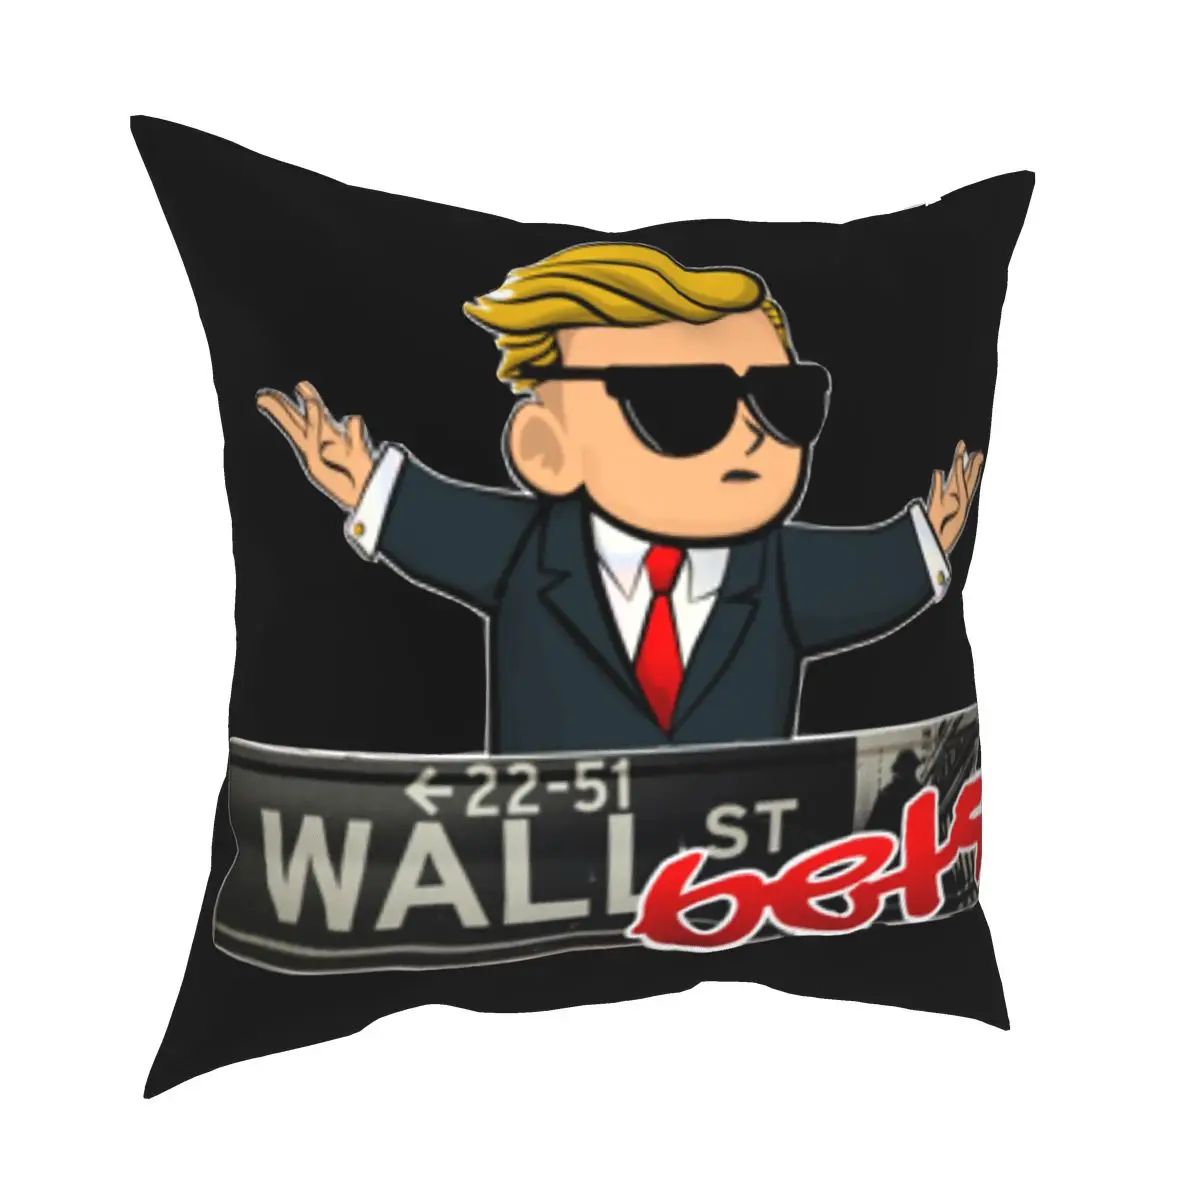 

The Official WallStreetBets Hip Hop Throw Pillow Cover The Kid Gamestop GME WSB Cushions for Sofa Stock Stonks Trader Pillowcase